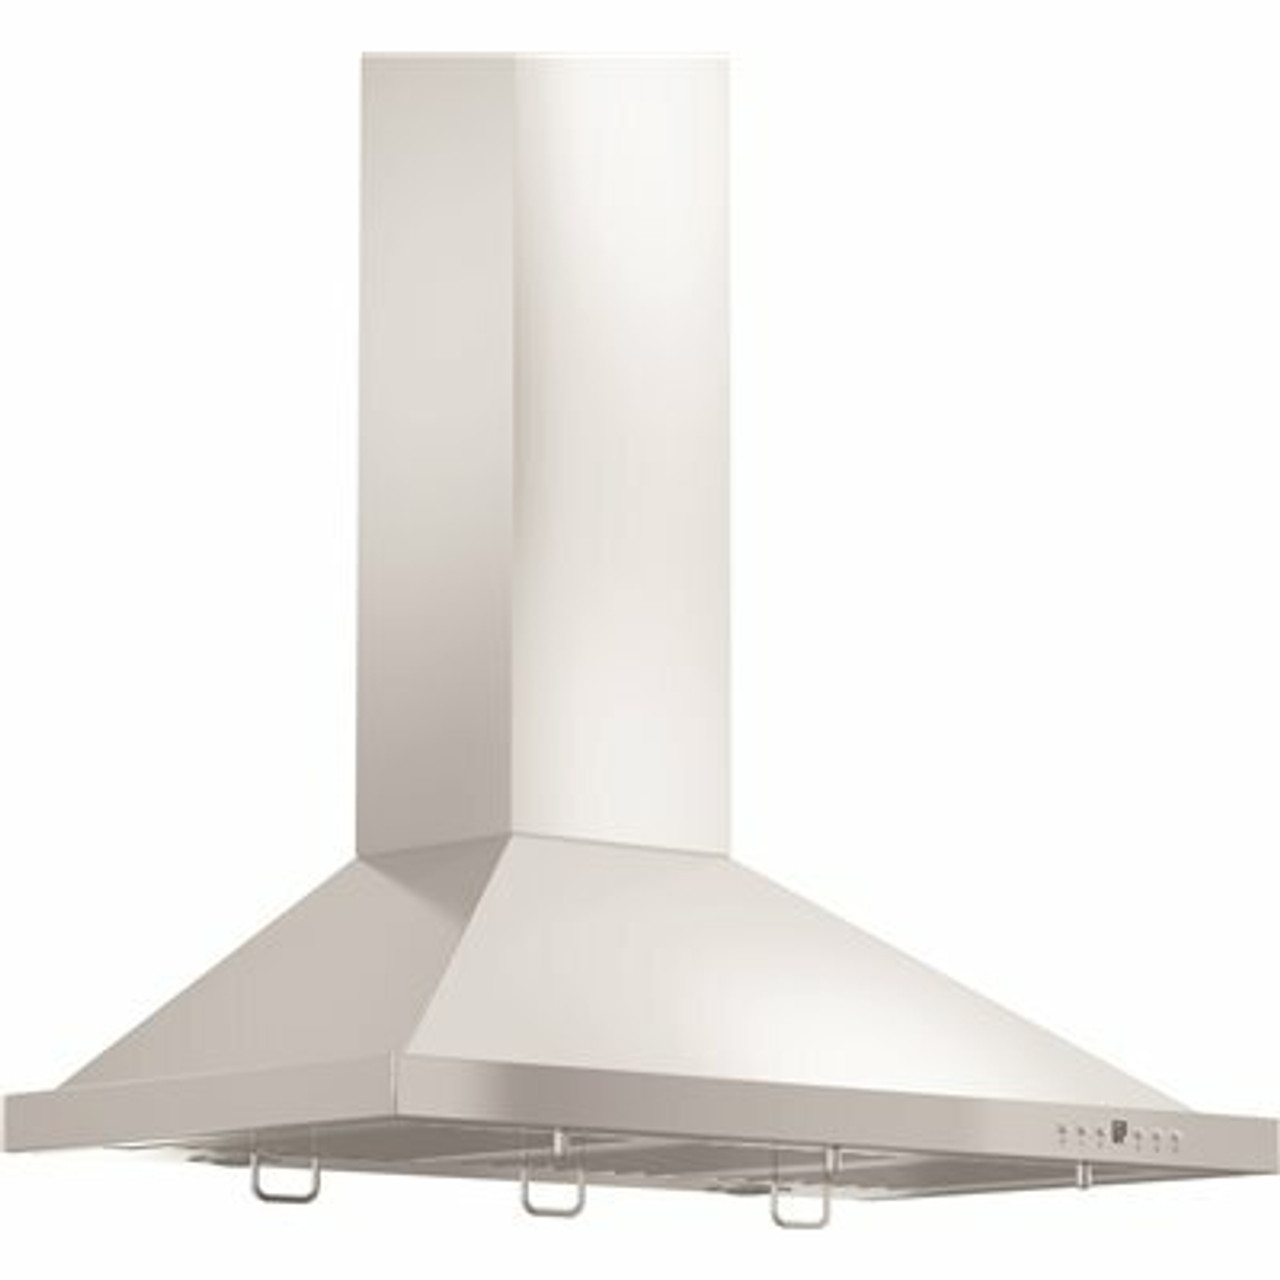 Zline Kitchen And Bath 48 In. Convertible Vent Wall Mount Range Hood In Stainless Steel With Crown Molding (Kbcrn-48)